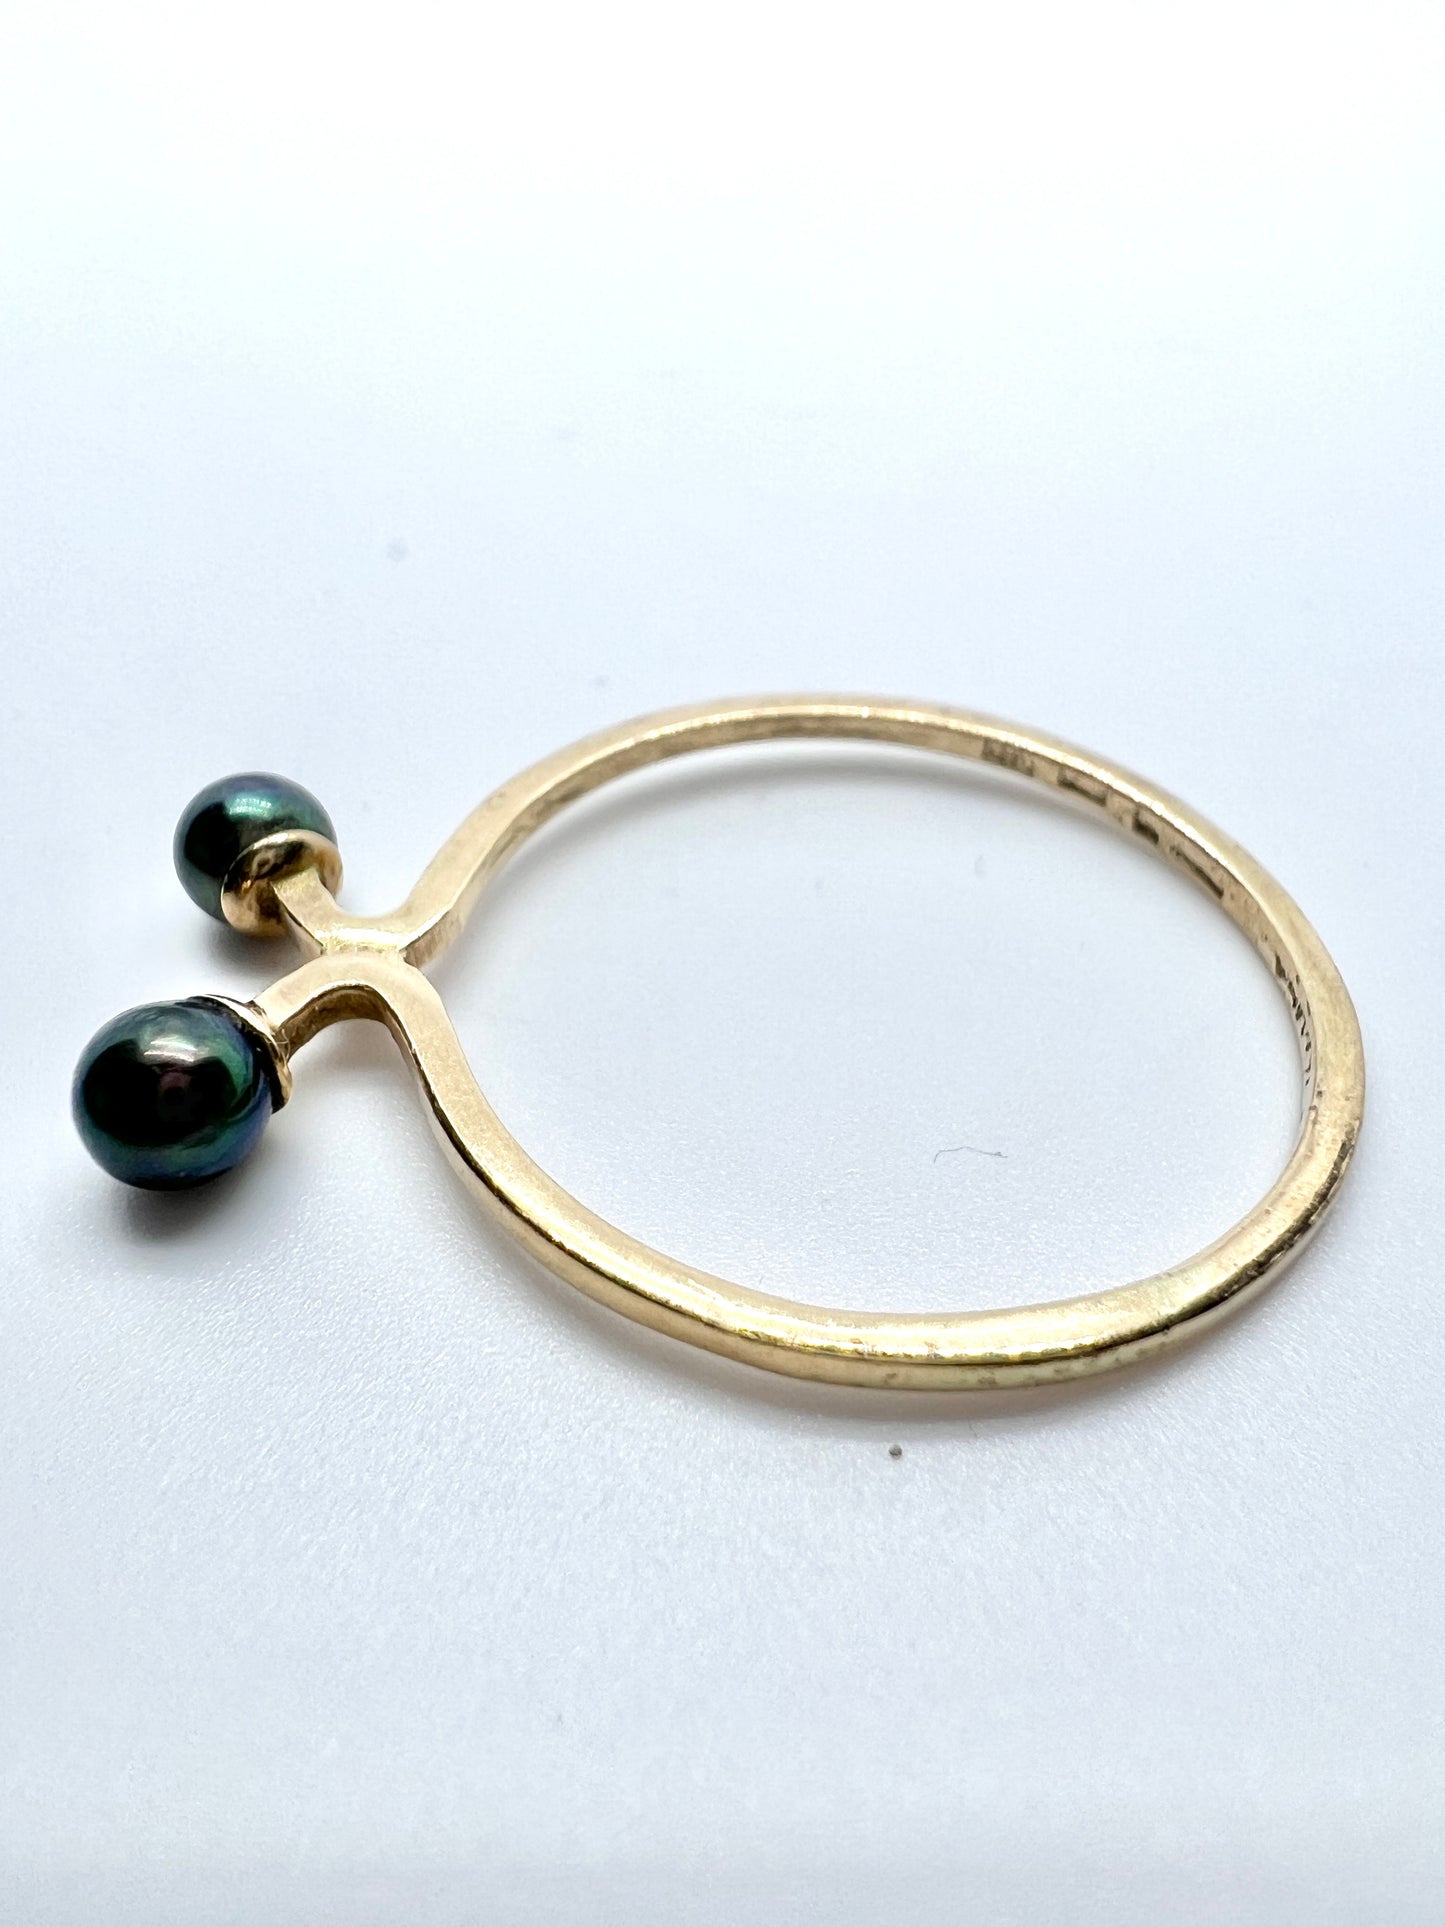 Theresia Hvorslev, Sweden 1988. Vintage 18k Gold Cultured Pearl Stack Ring. "The Tale Of The Ring"